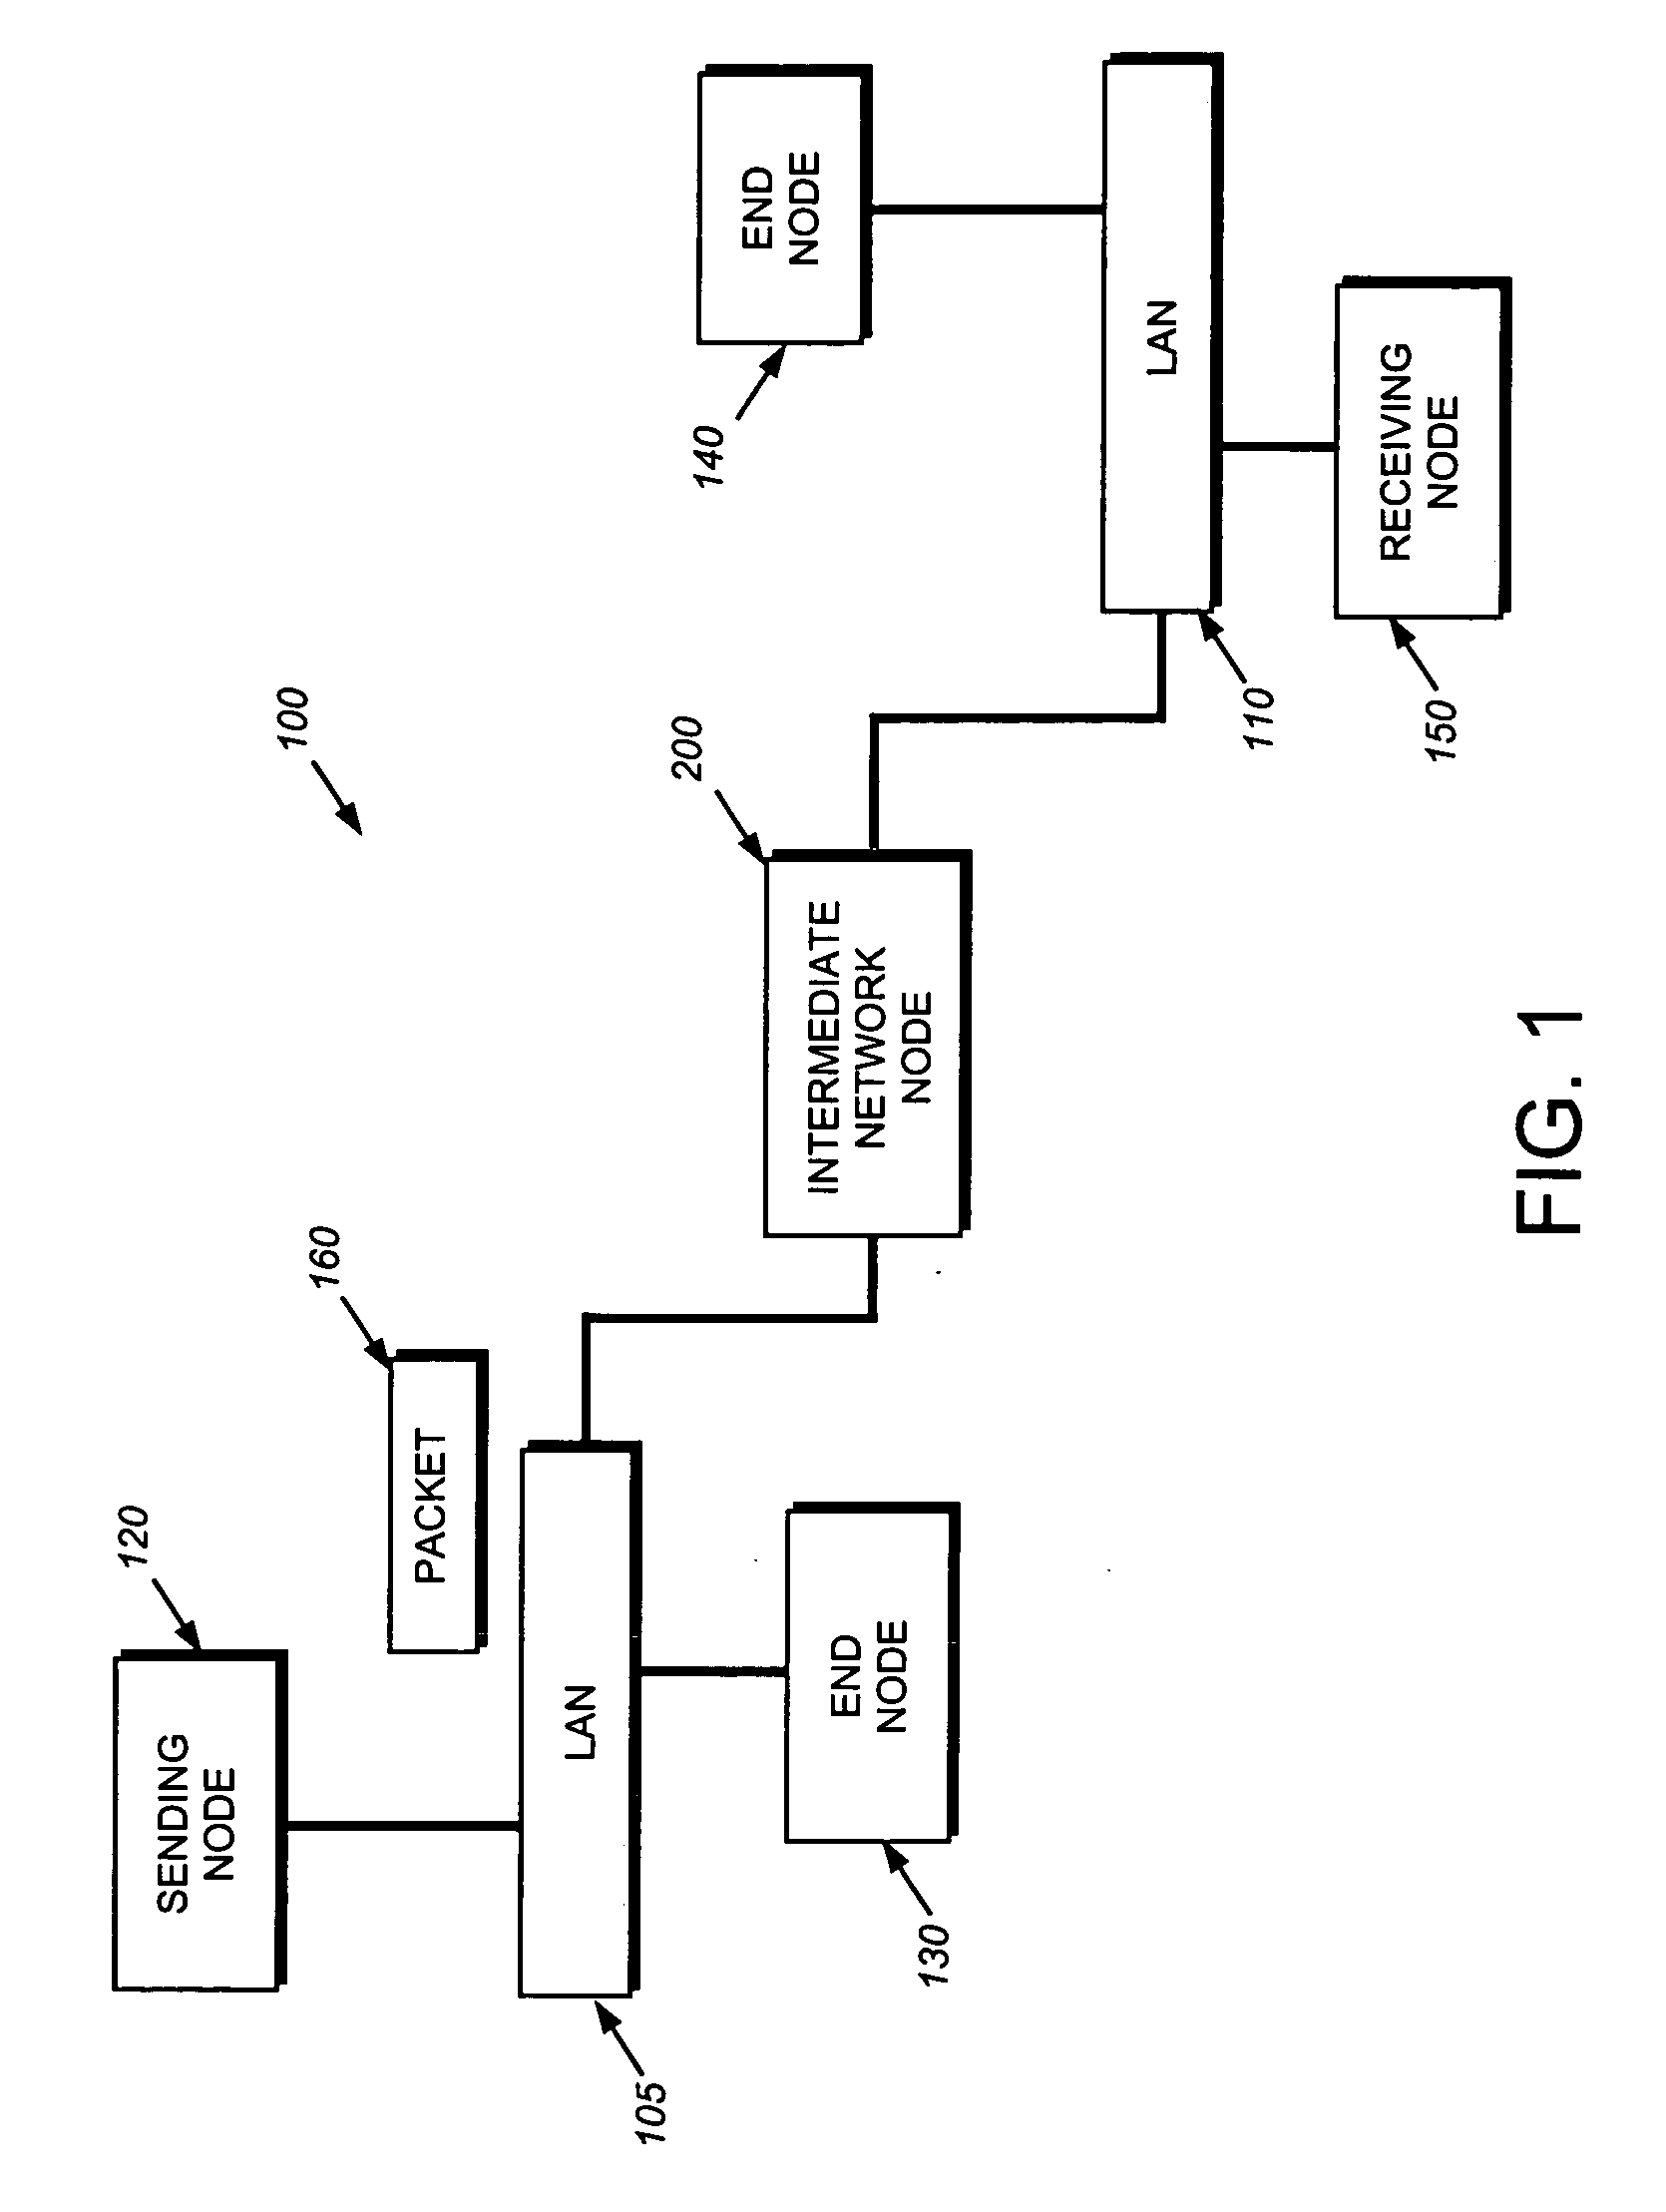 Hardware filtering support for denial-of-service attacks